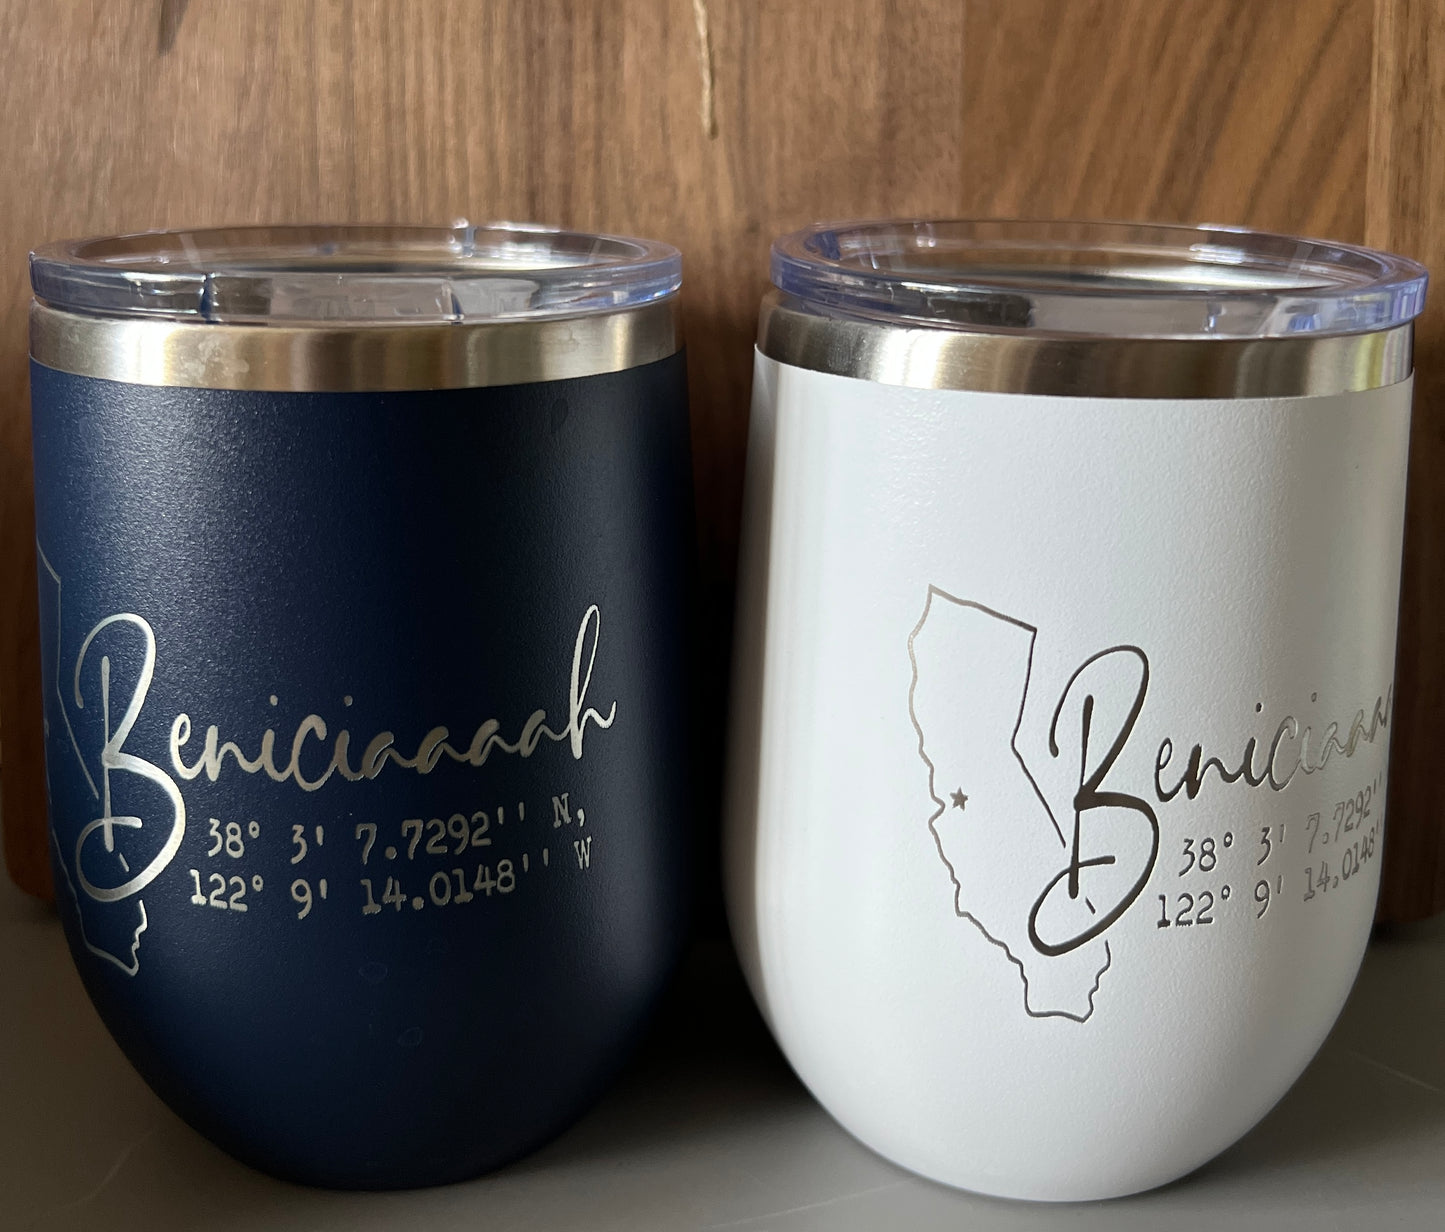 BENICIA | 12 oz Wine Tumbler | Multiple Styles and Colors